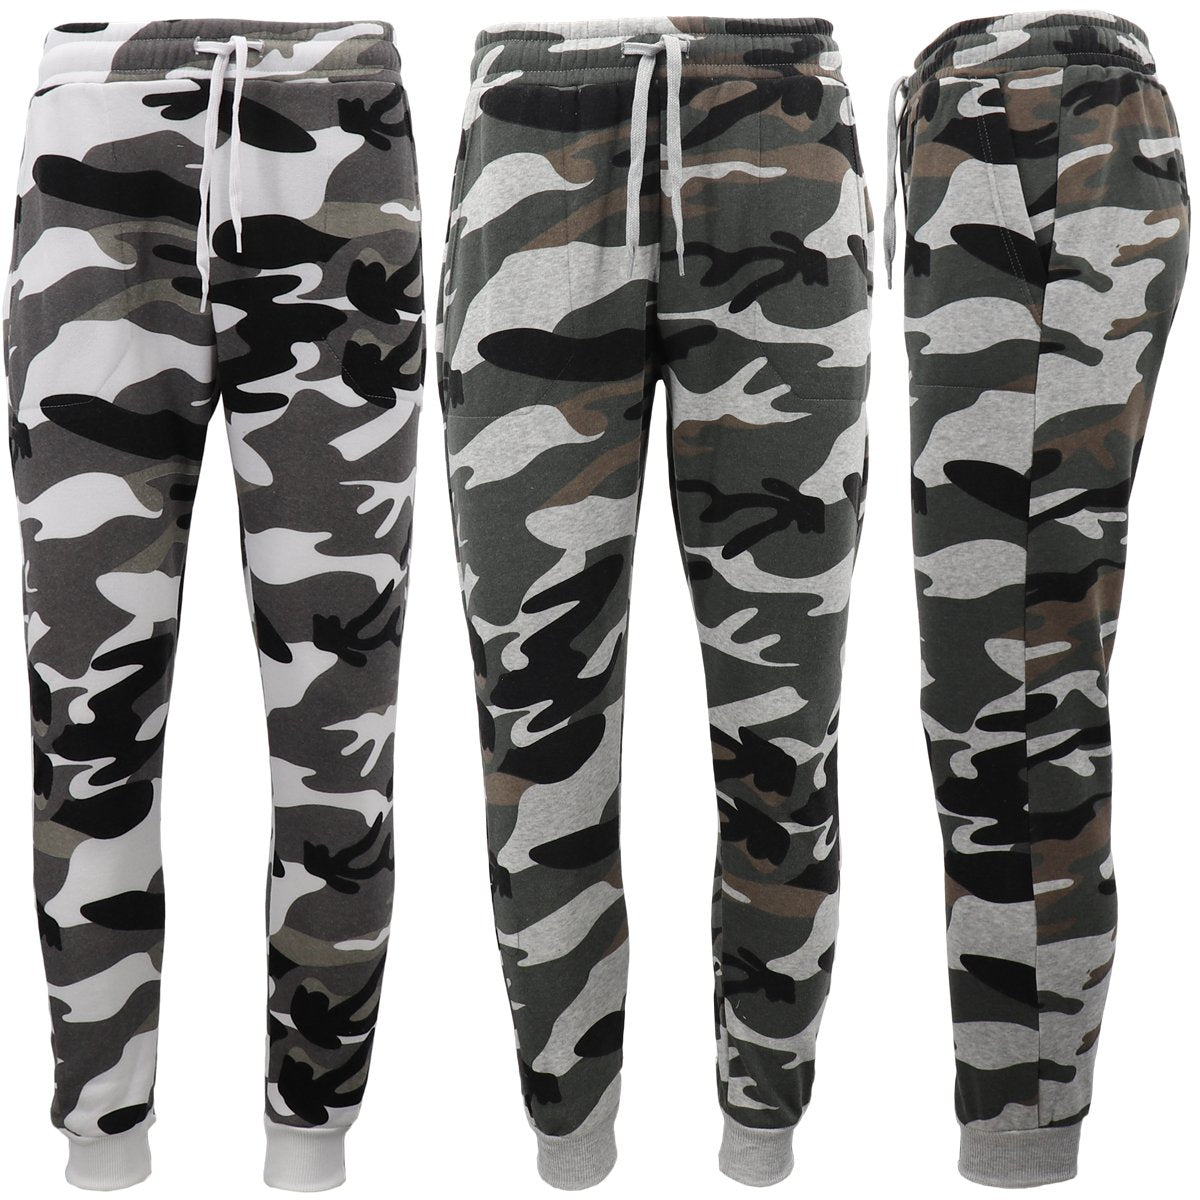 Men's Fleece Track Pants Military Camouflage Tactical Gym Trousers w ...